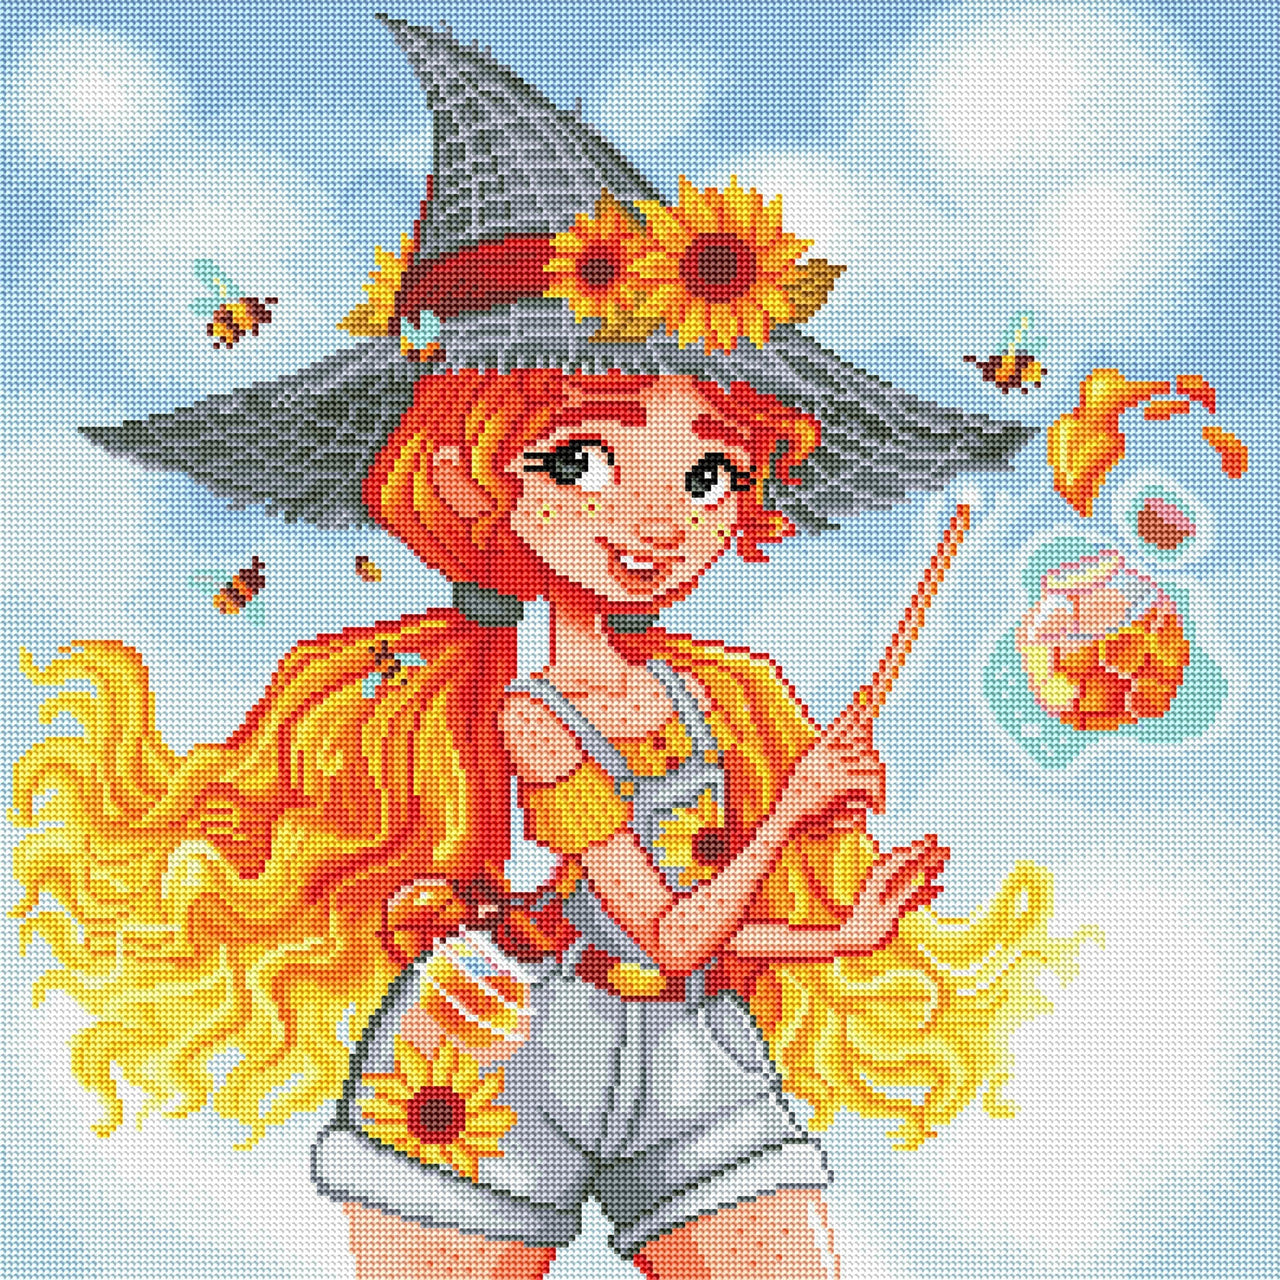 Diamond Painting Izzy, The Beekeeper Witch 22" x 22″ (56cm x 56cm) / Round with 38 Colors including 2 ABs / 39,203